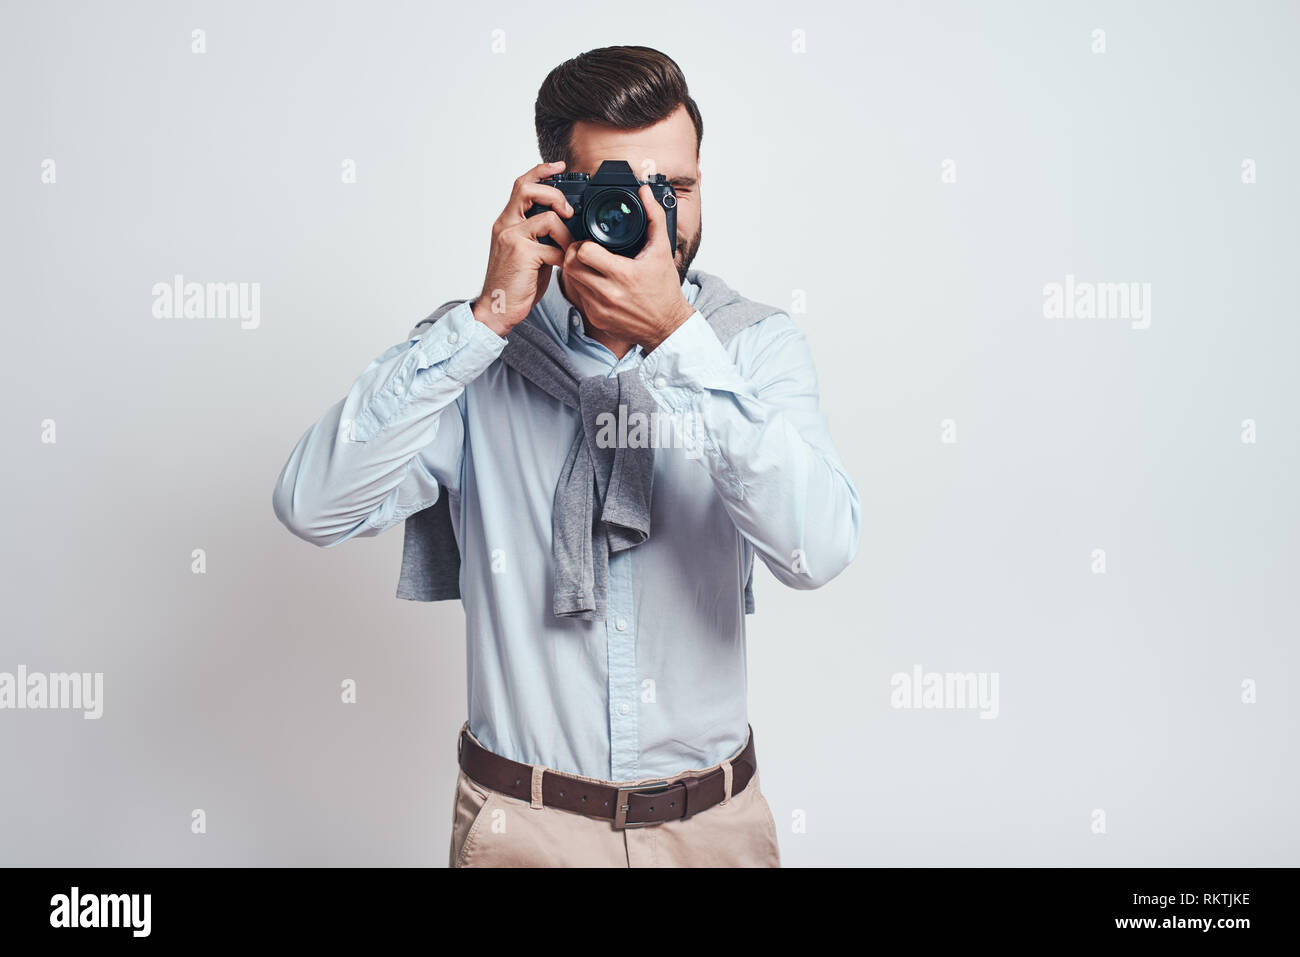 Do what you love. Young bearded man in blue shirt taking picture with camera isolated on grey background. Close-up picture Stock Photo